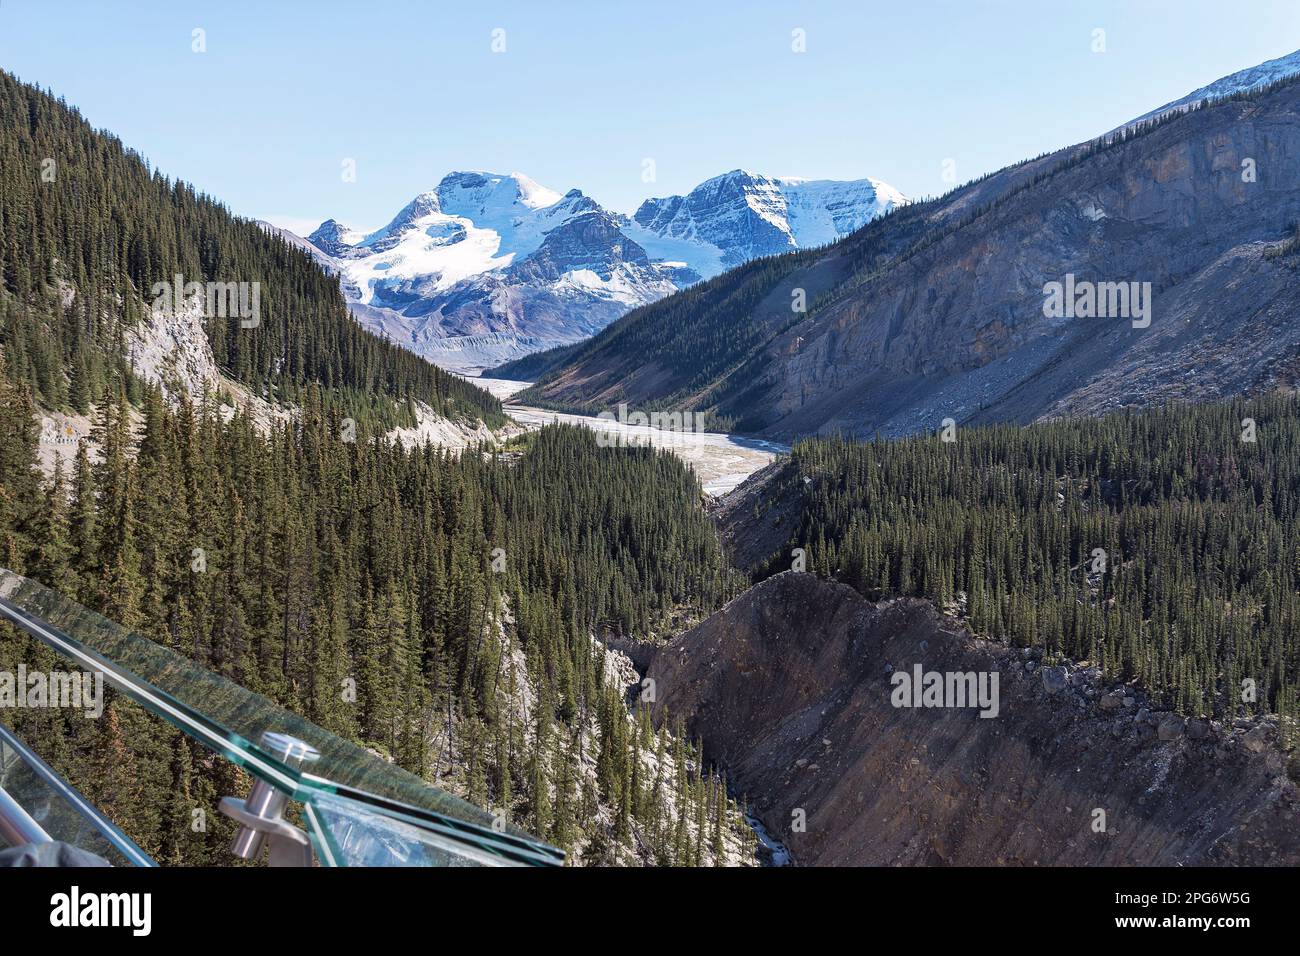 Wilcox Peak from the Columbia Icefield Skywalk in Jasper Park in Canada above  a glacier with a glass railing in the foreground and a clear blue sky Stock Photo